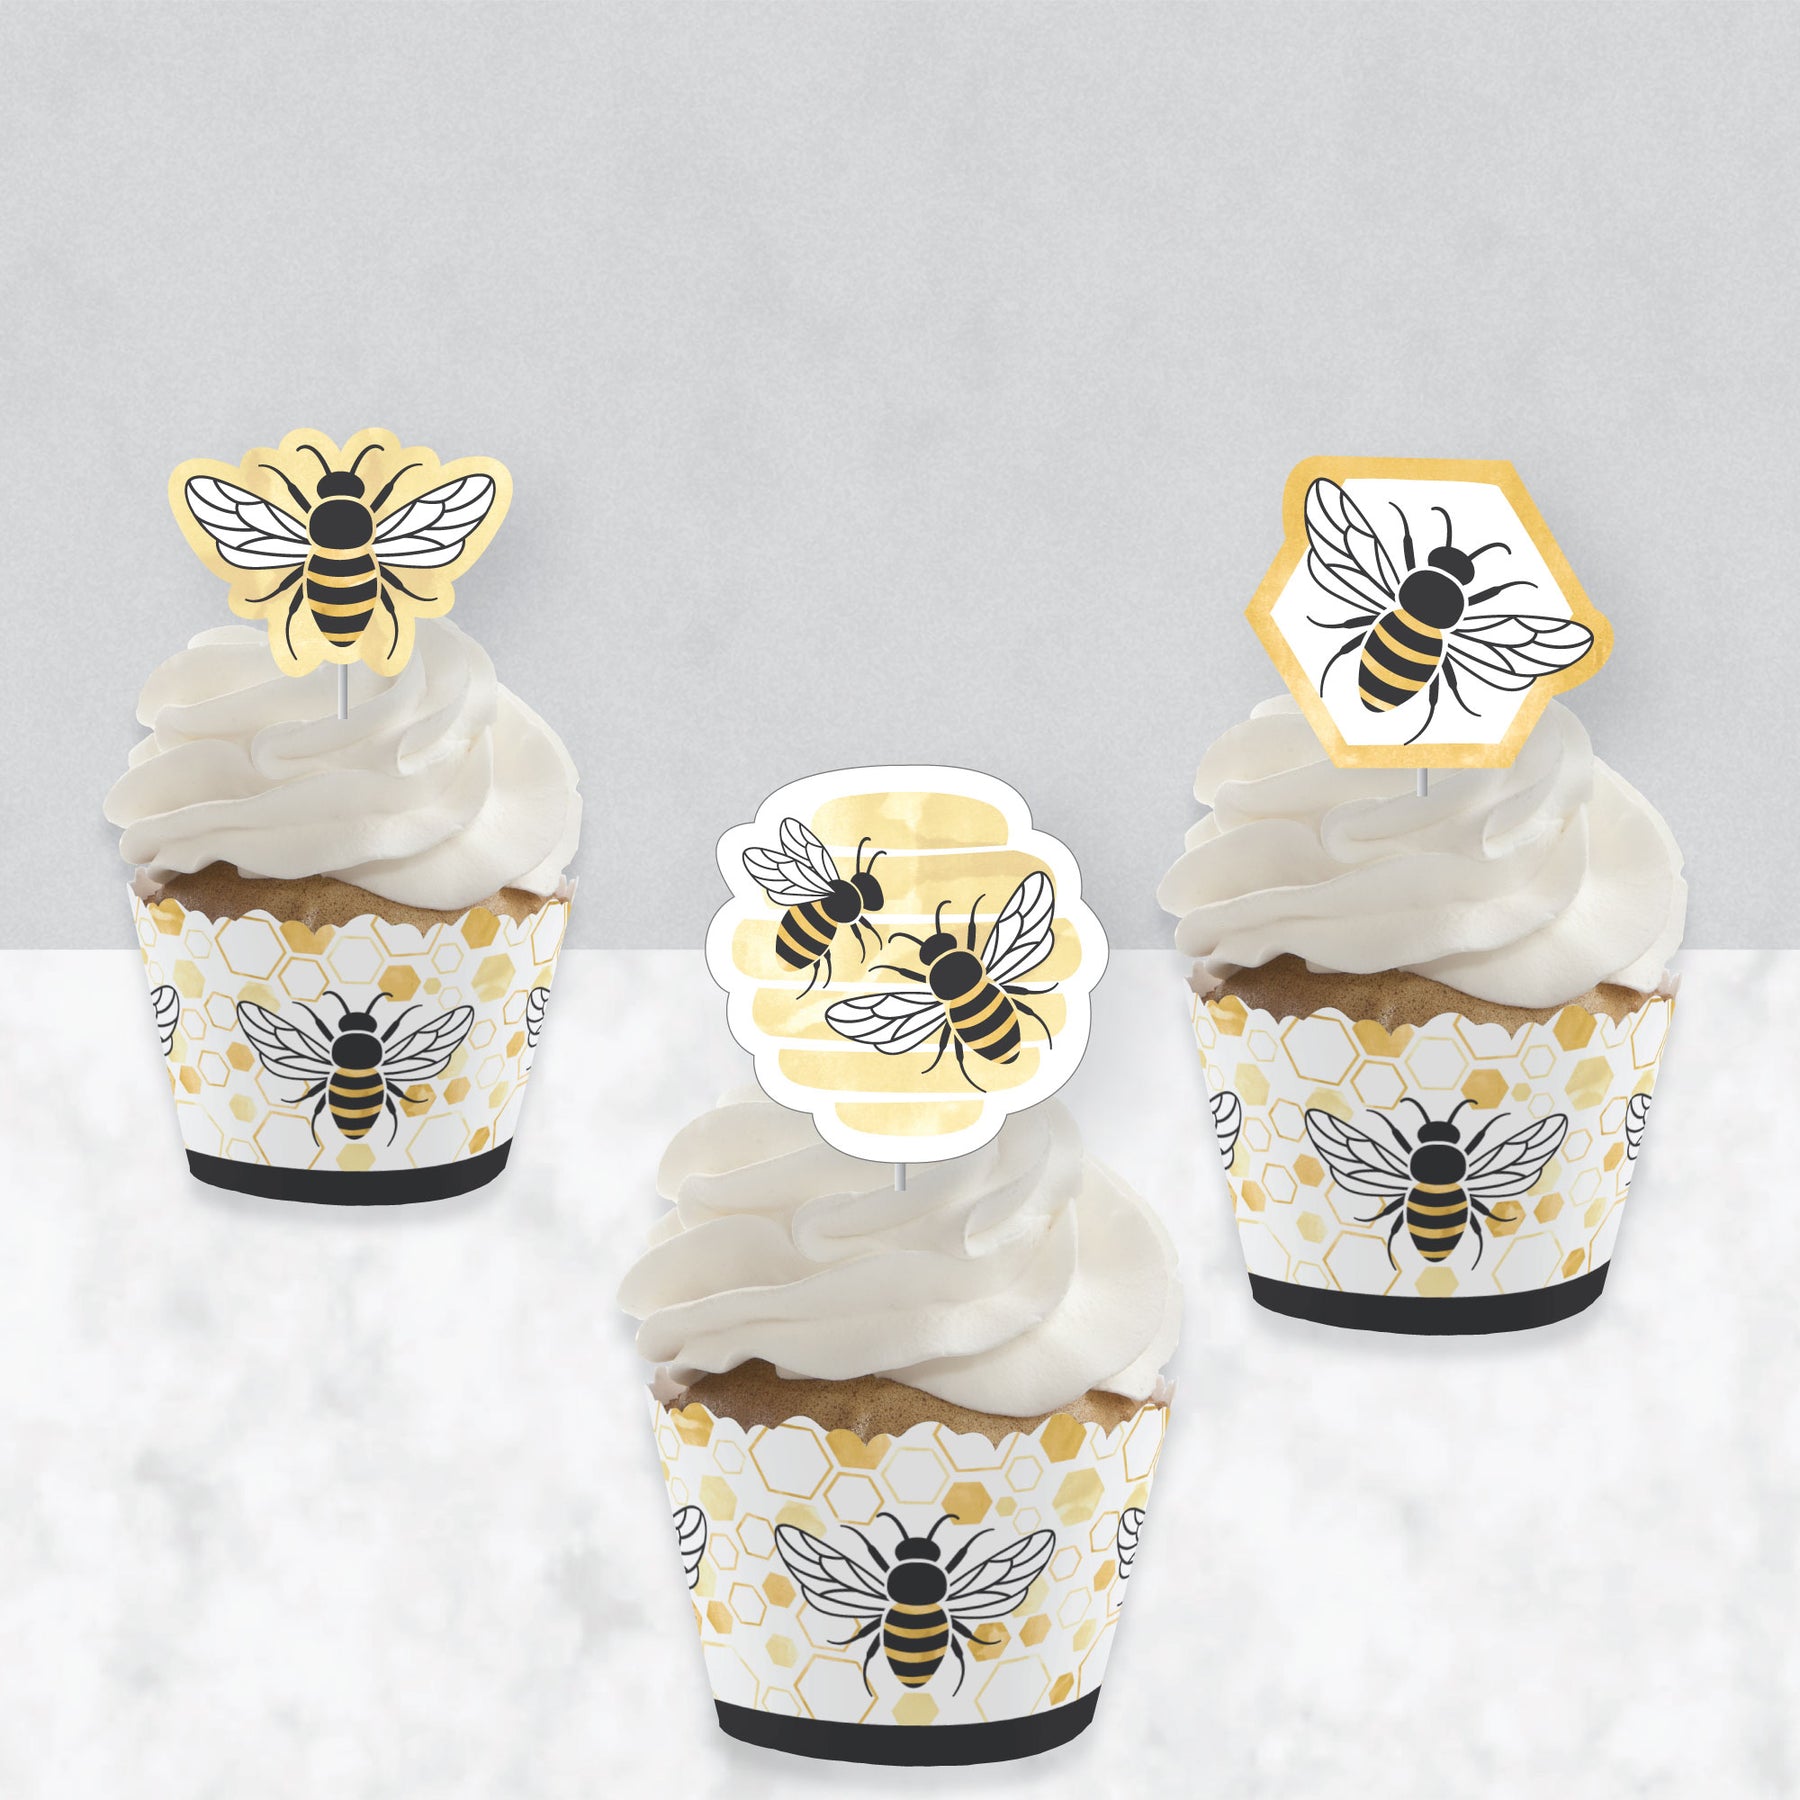 Bumble Bee Cupcake Toppers, Bumble Bee Party Bumble Bee Birthday Toppers  Personalized Cupcake Toppers Cupcake Toppers 